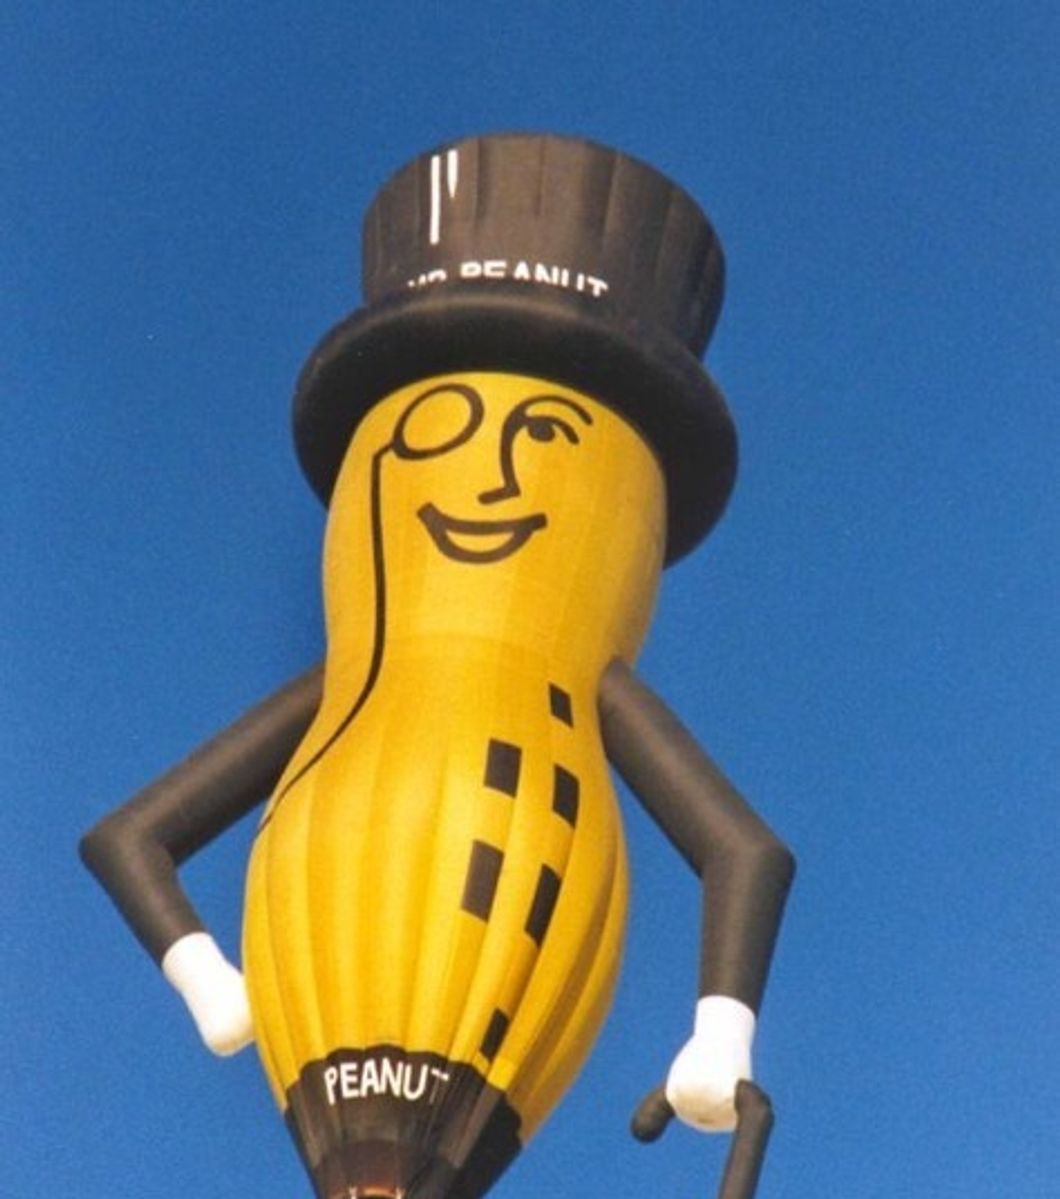 How to Have Sex with Mr. Peanut